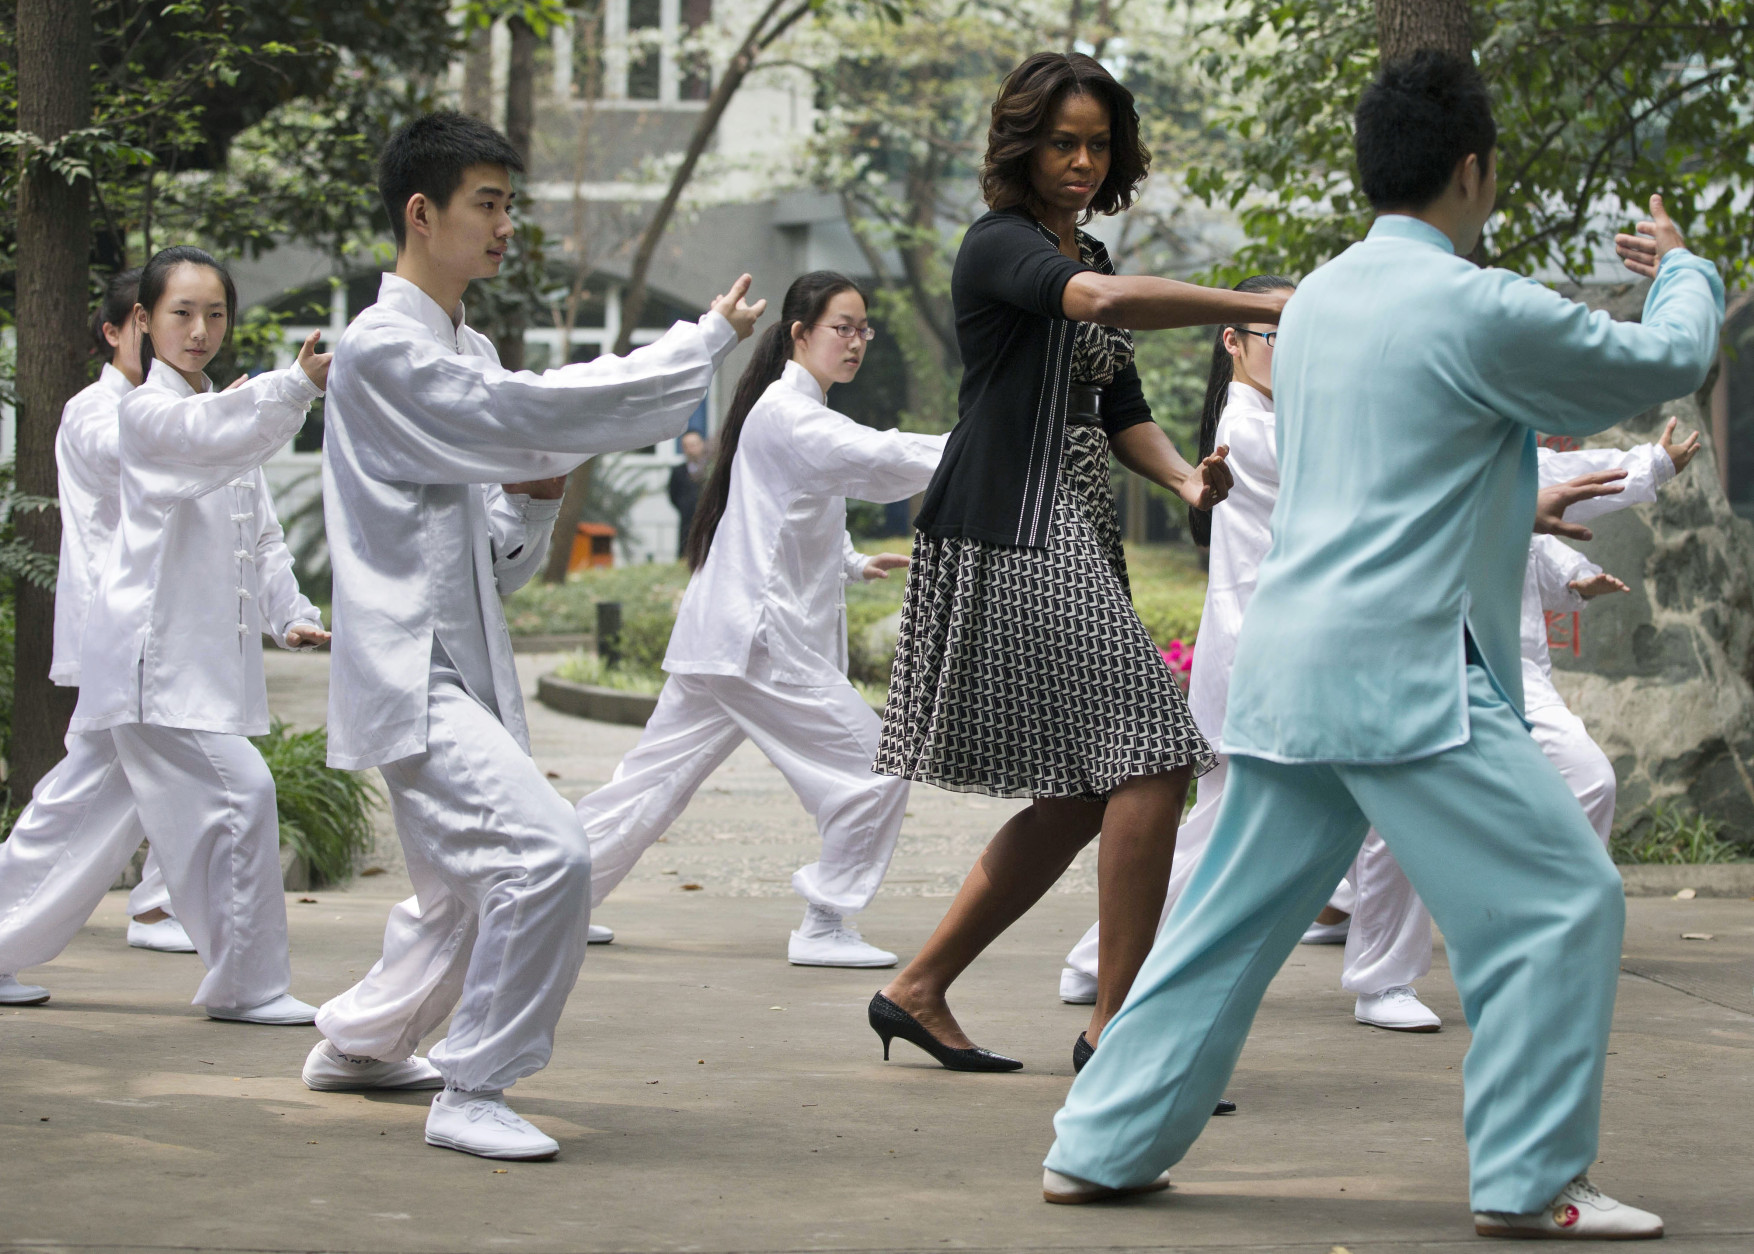 FOR USE AS DESIRED, YEAR END PHOTOS - FILE - U.S. first lady Michelle Obama practices tai chi with students at Chengdu No.7 High School in Chengdu in southwest China's Sichuan province Tuesday, March 25, 2014. (AP Photo/Andy Wong, File)